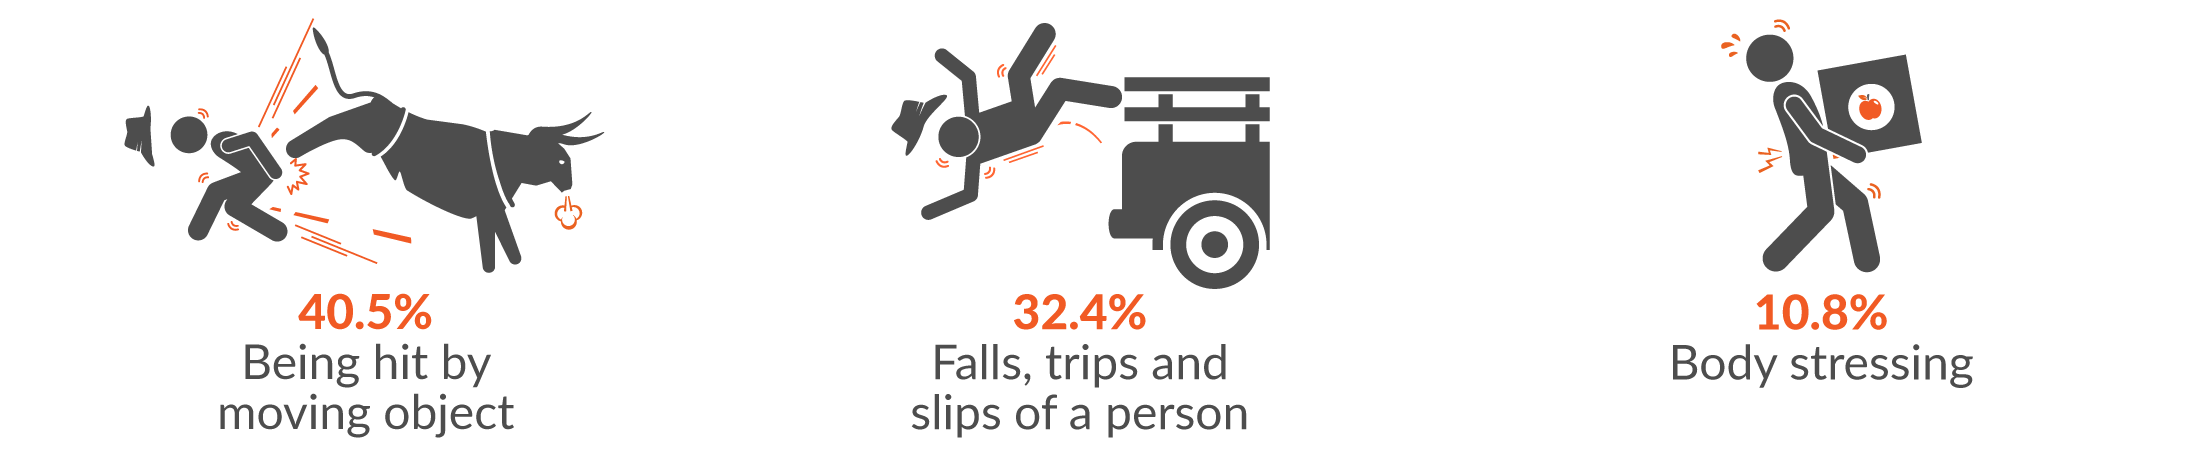 This infographic shows the main three mechanisms of serious injury for Agriculture, forestry and fishing claims were 40.5% being hit by moving object; 32.4% falls, trips and slips of a person; and 10.8% body stressing.